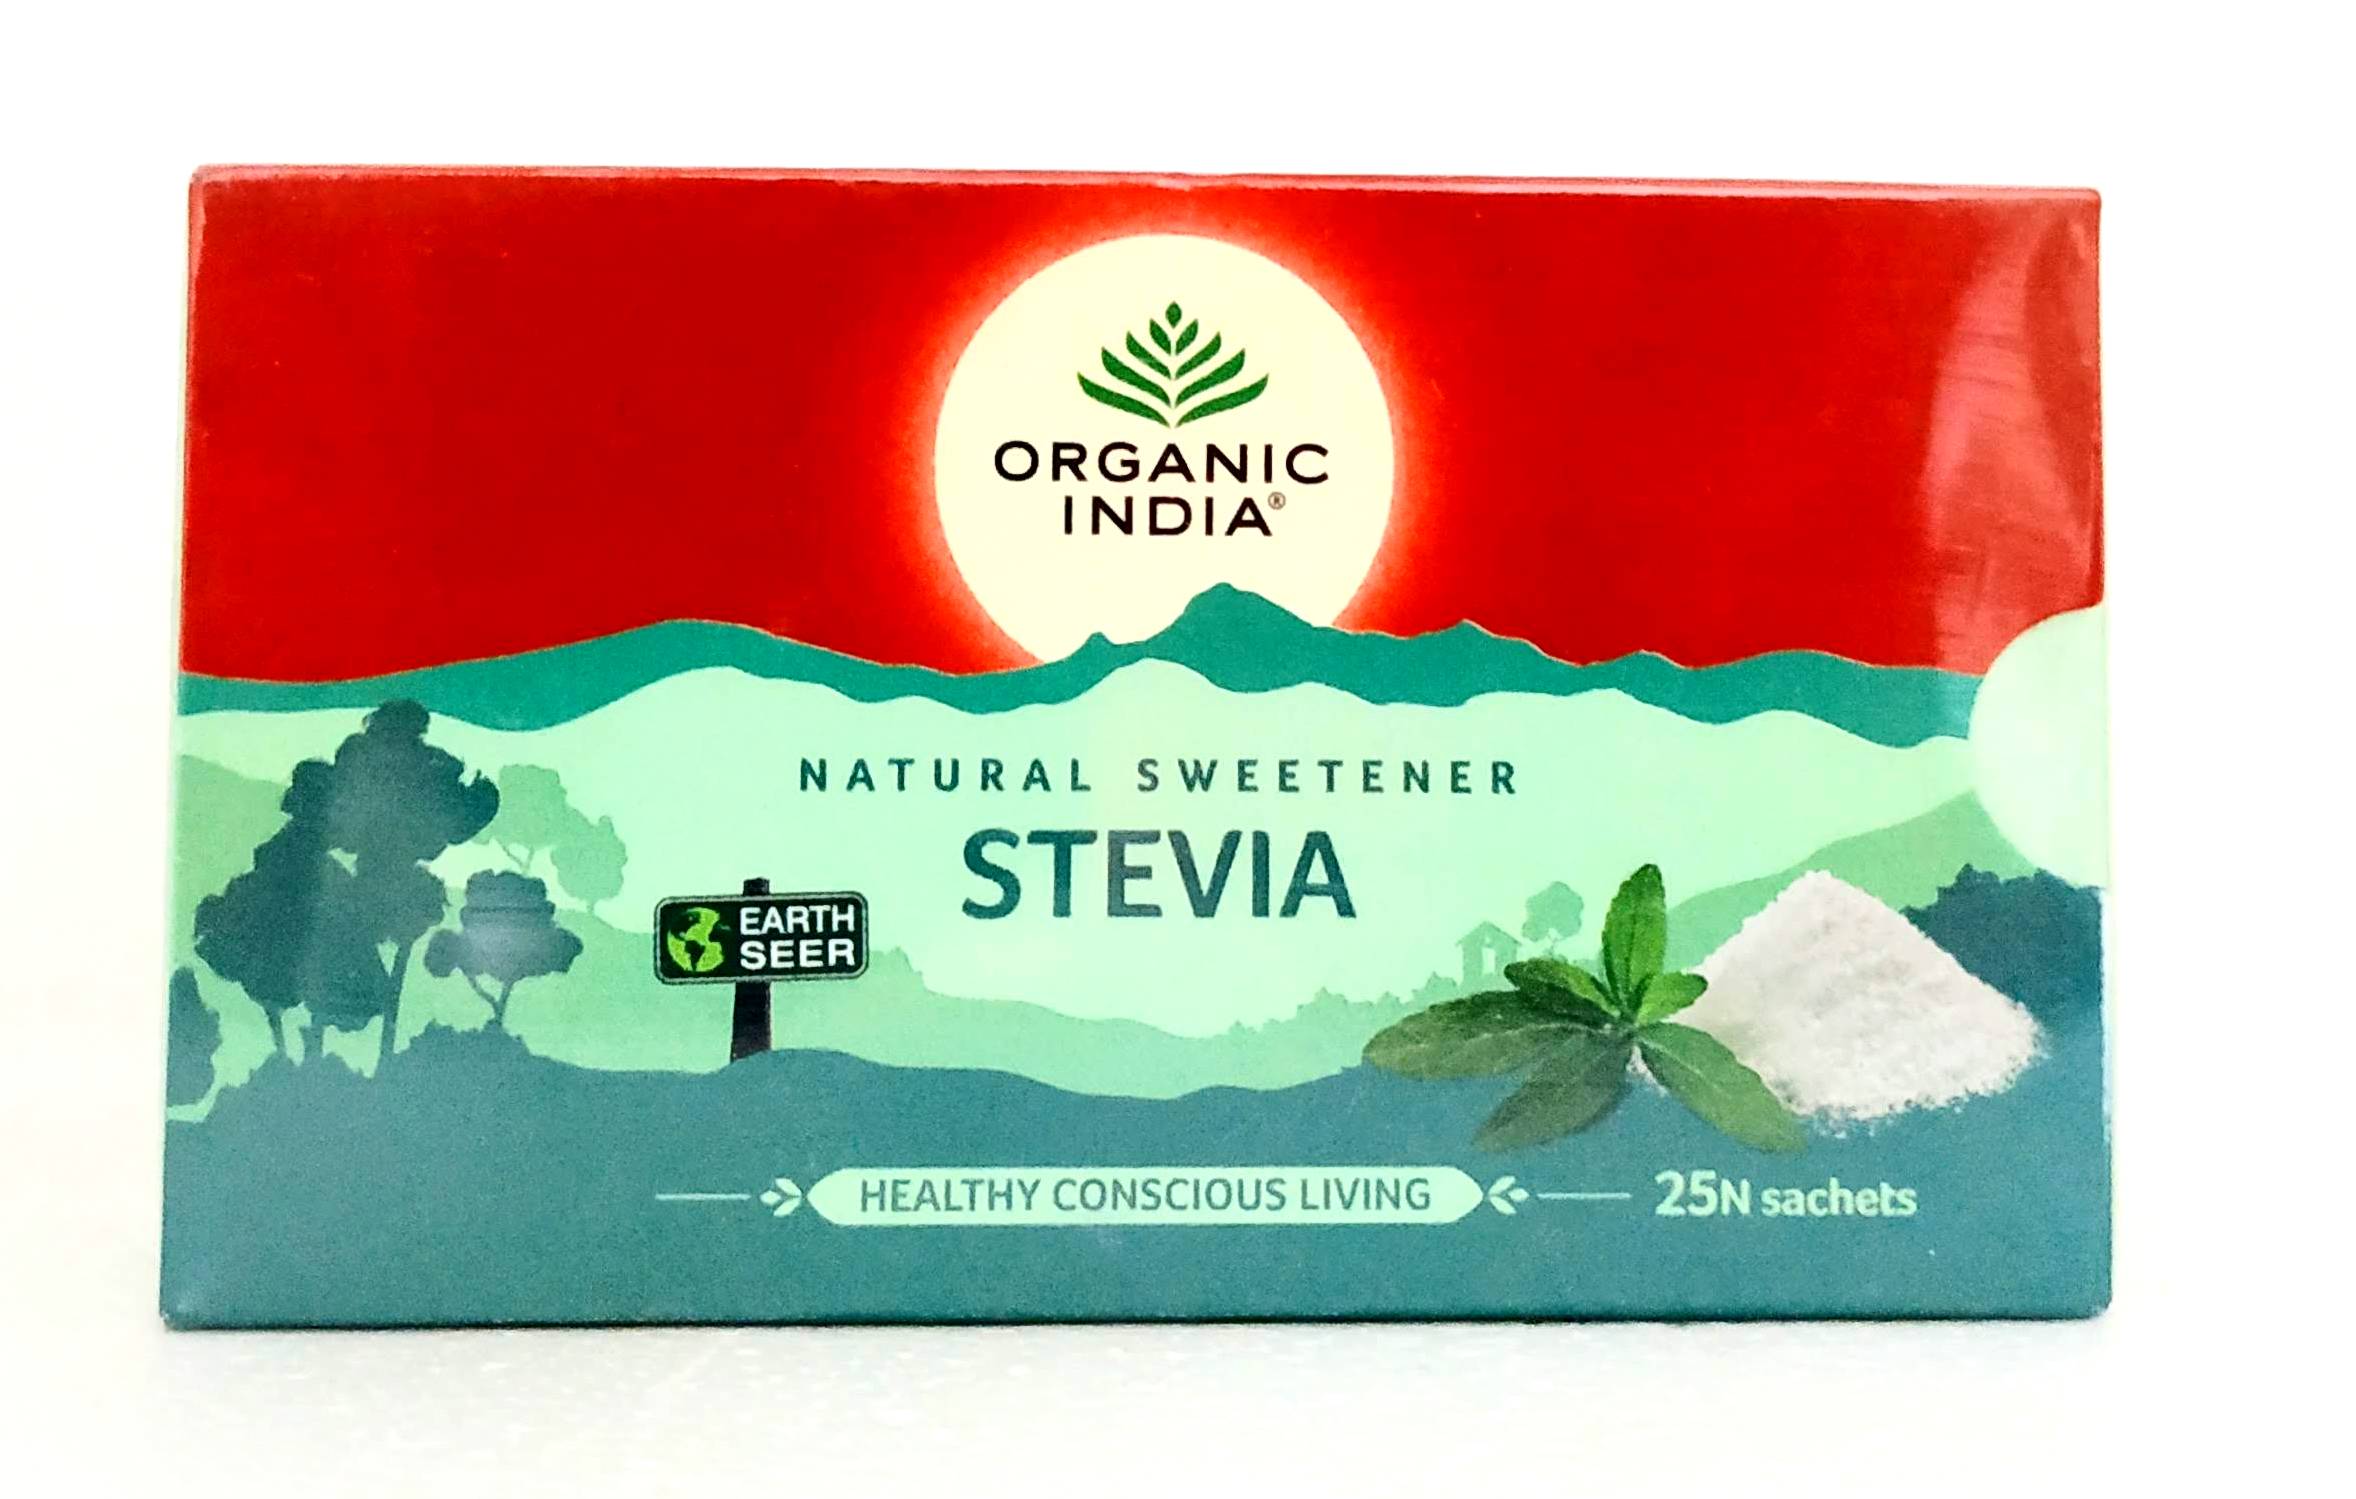 Shop Stevia natural sweetener - 25sachets at price 95.00 from Organic India Online - Ayush Care